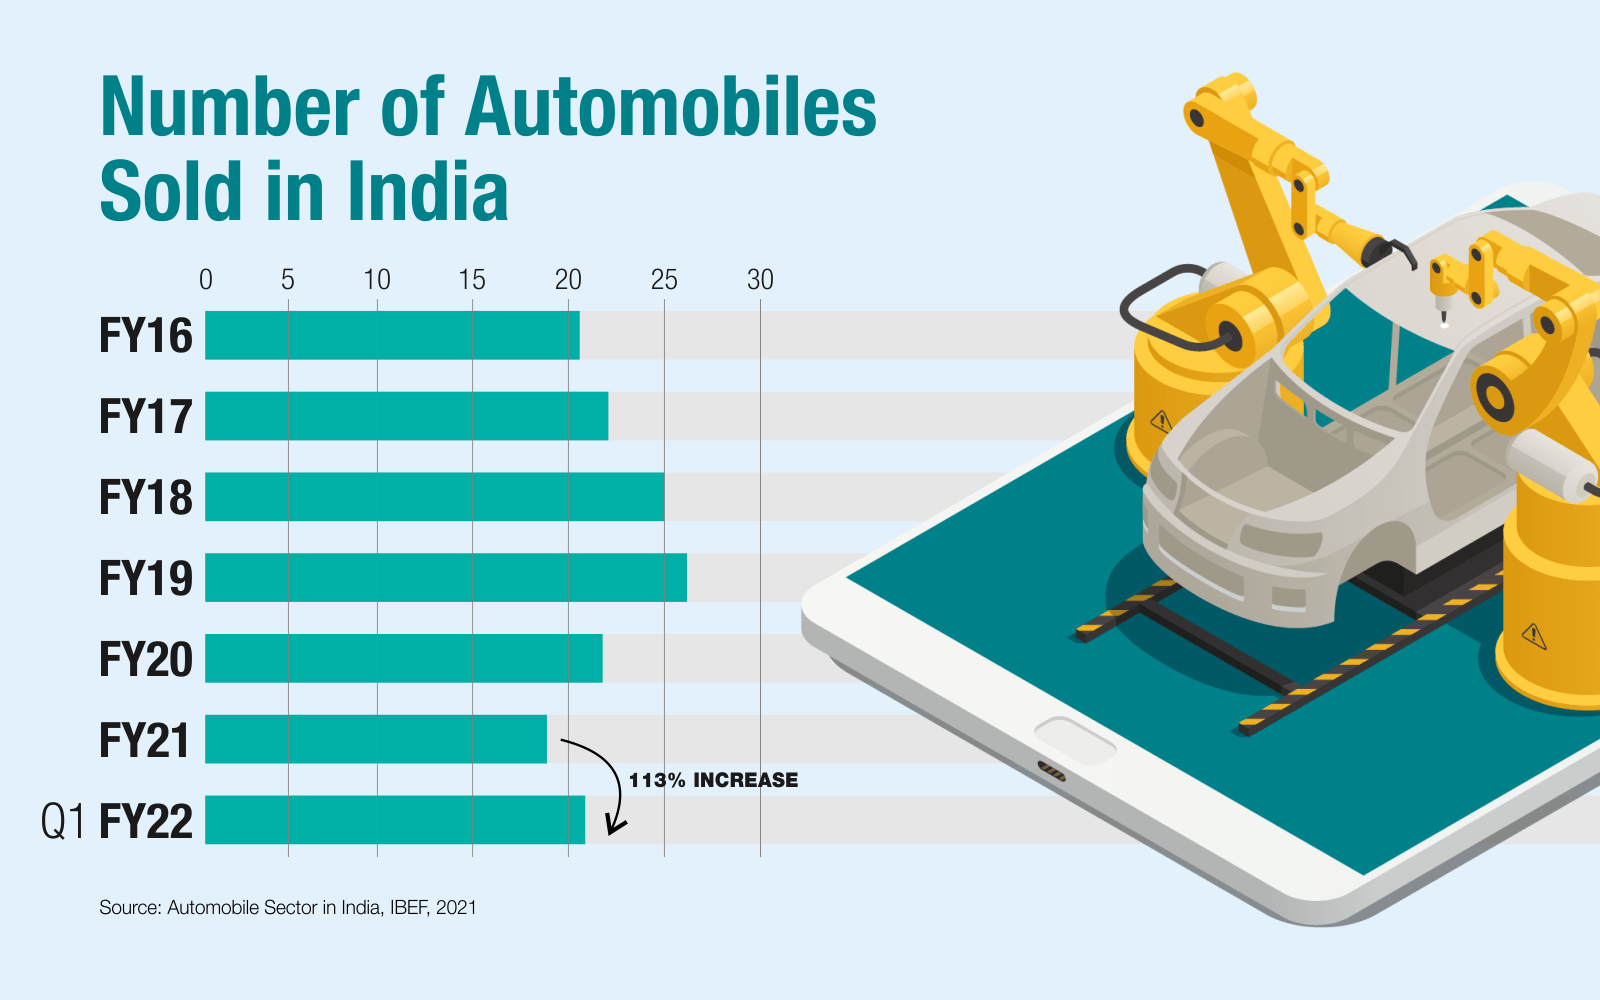 Number of Automobiles Sold in India